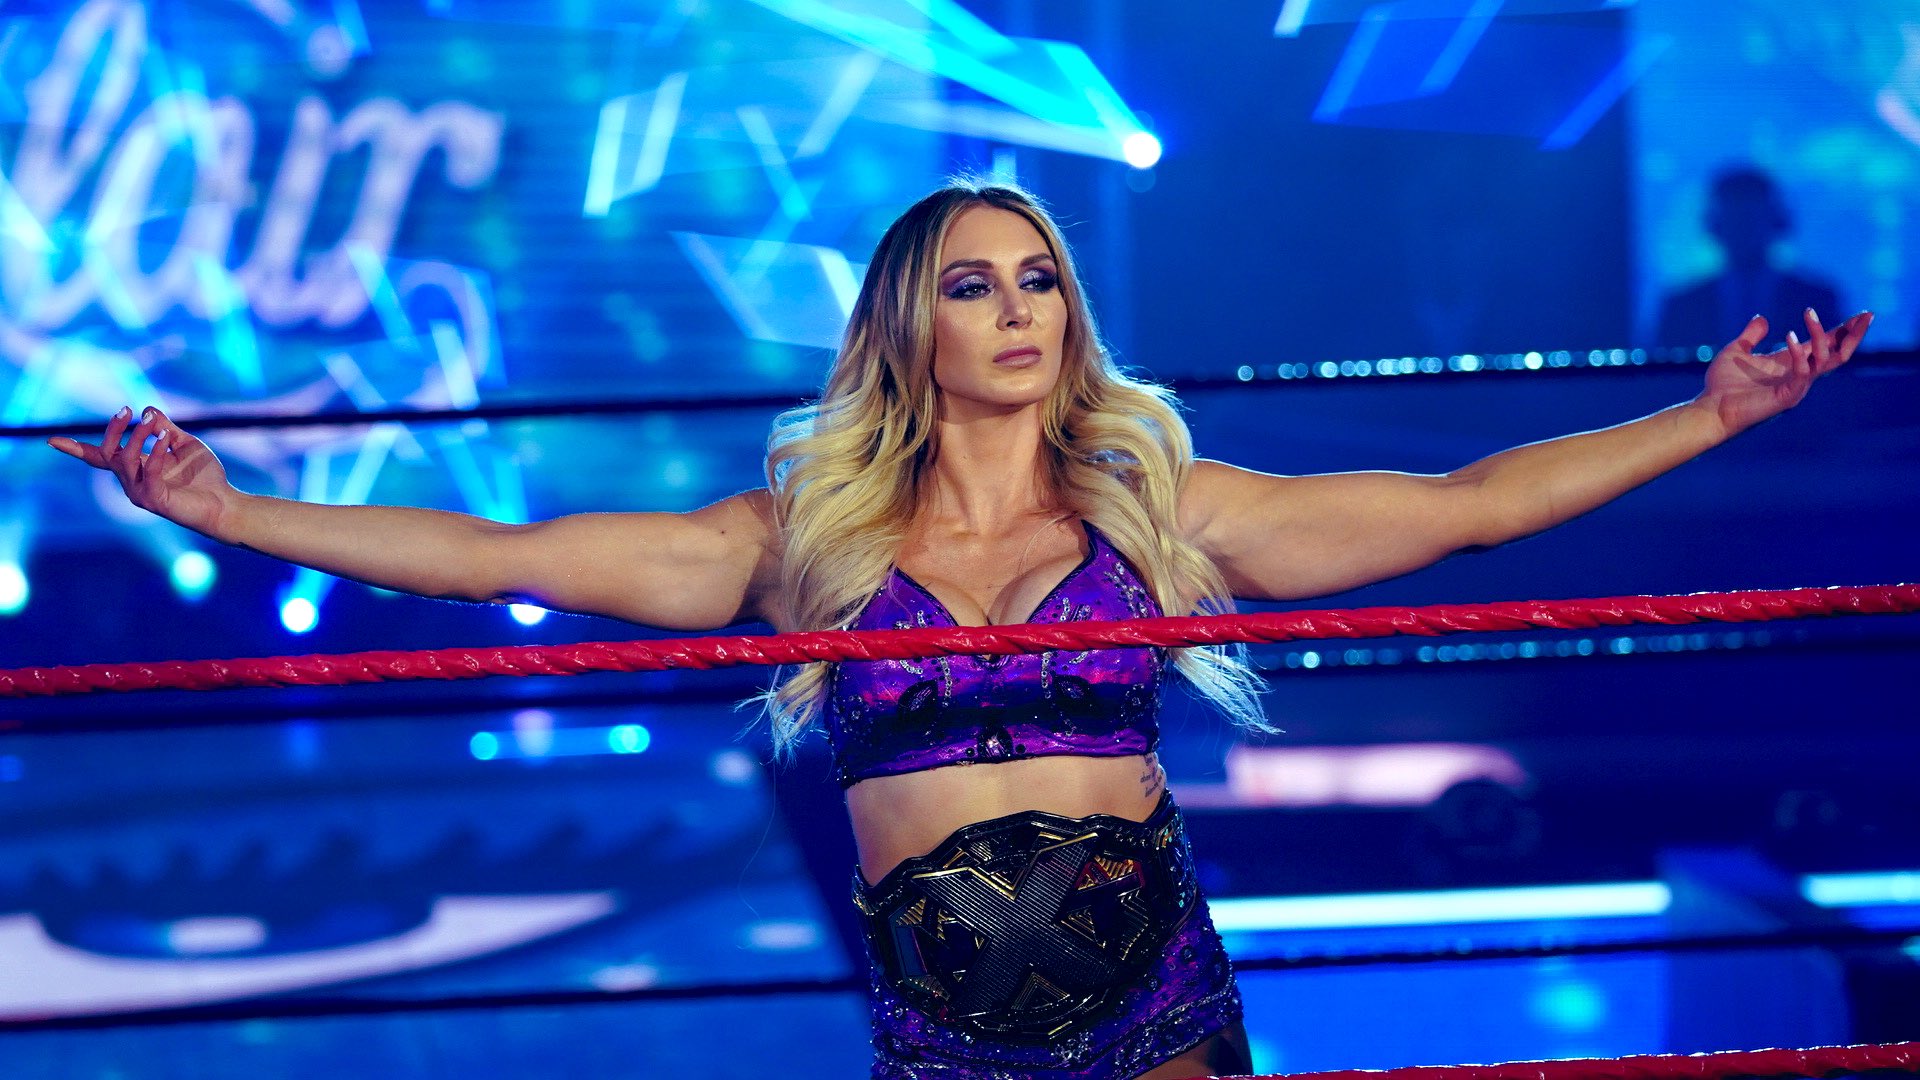 Charlotte Flair has several tattoos across her body